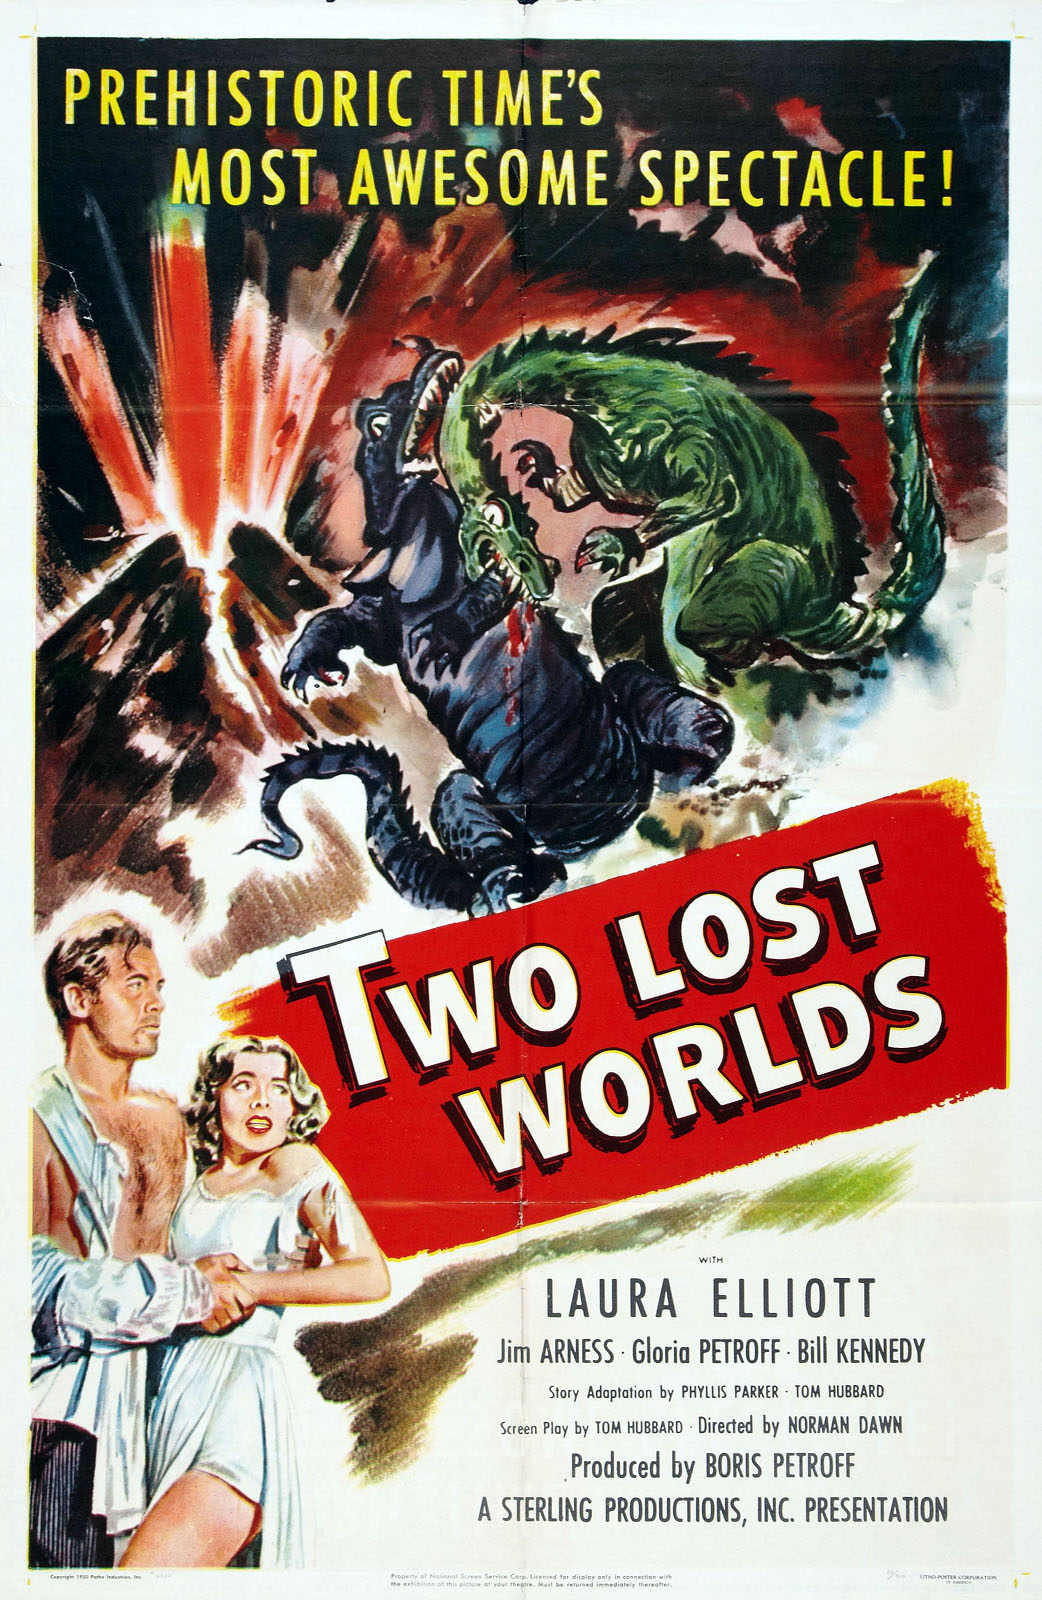 TWO LOST WORLDS